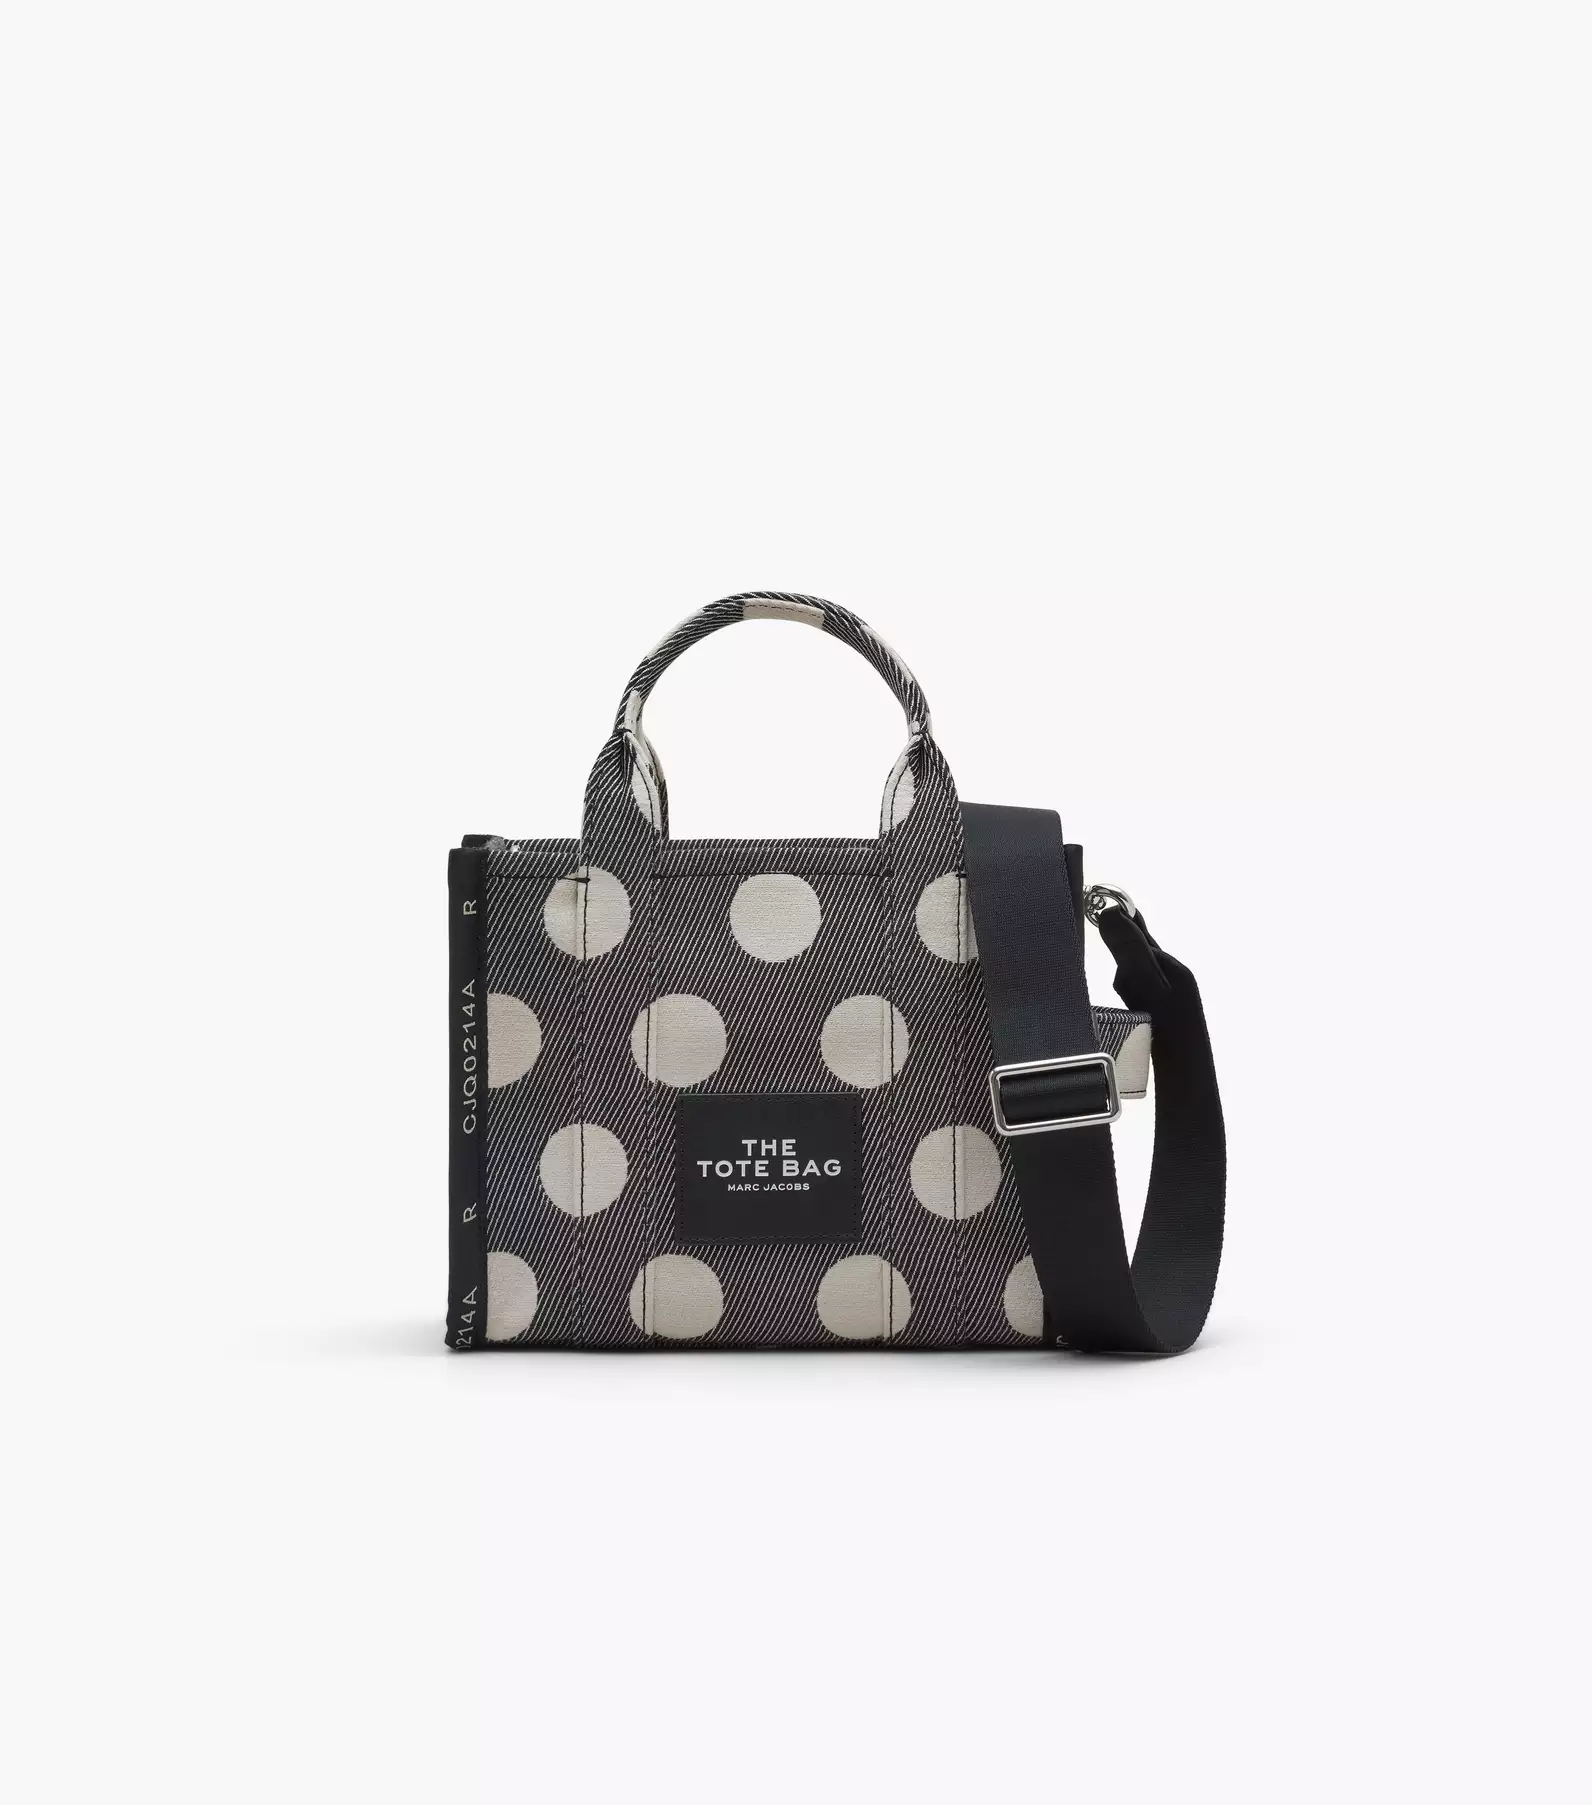 Need help authenticating! Marc Jacobs Tote Bag. : r/purses